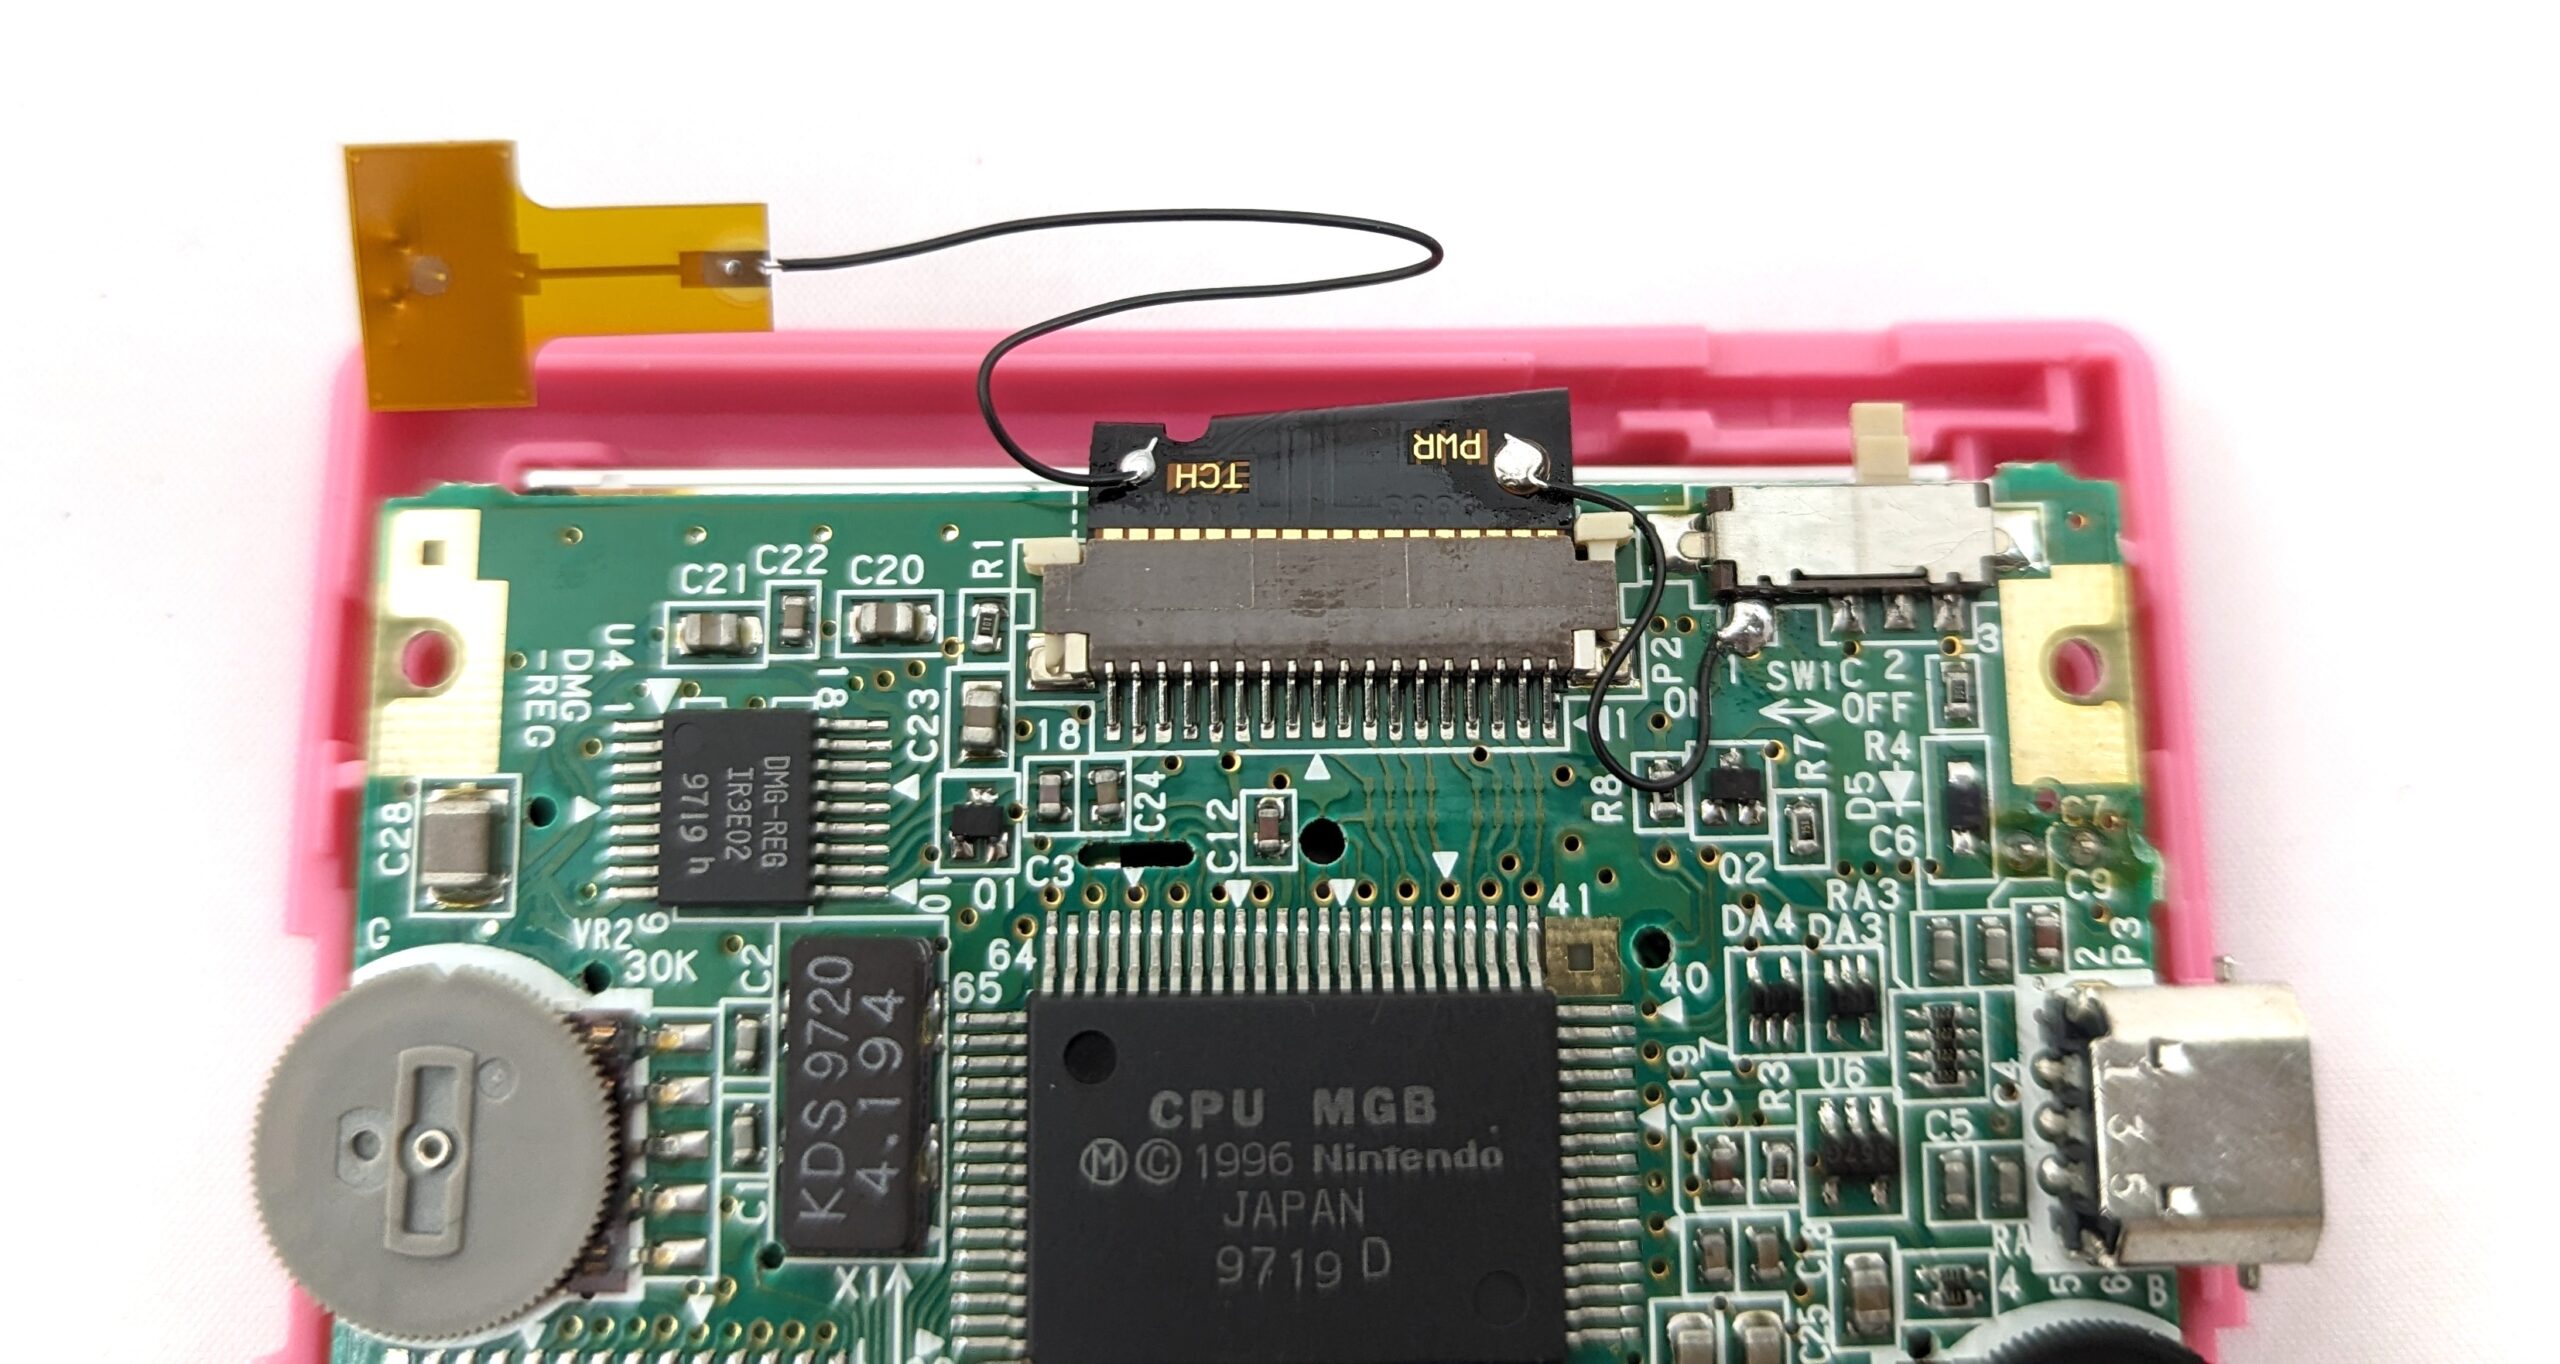 A close up on the top of the game boy critcuit board, with a touch sensor attached on a thin wire.